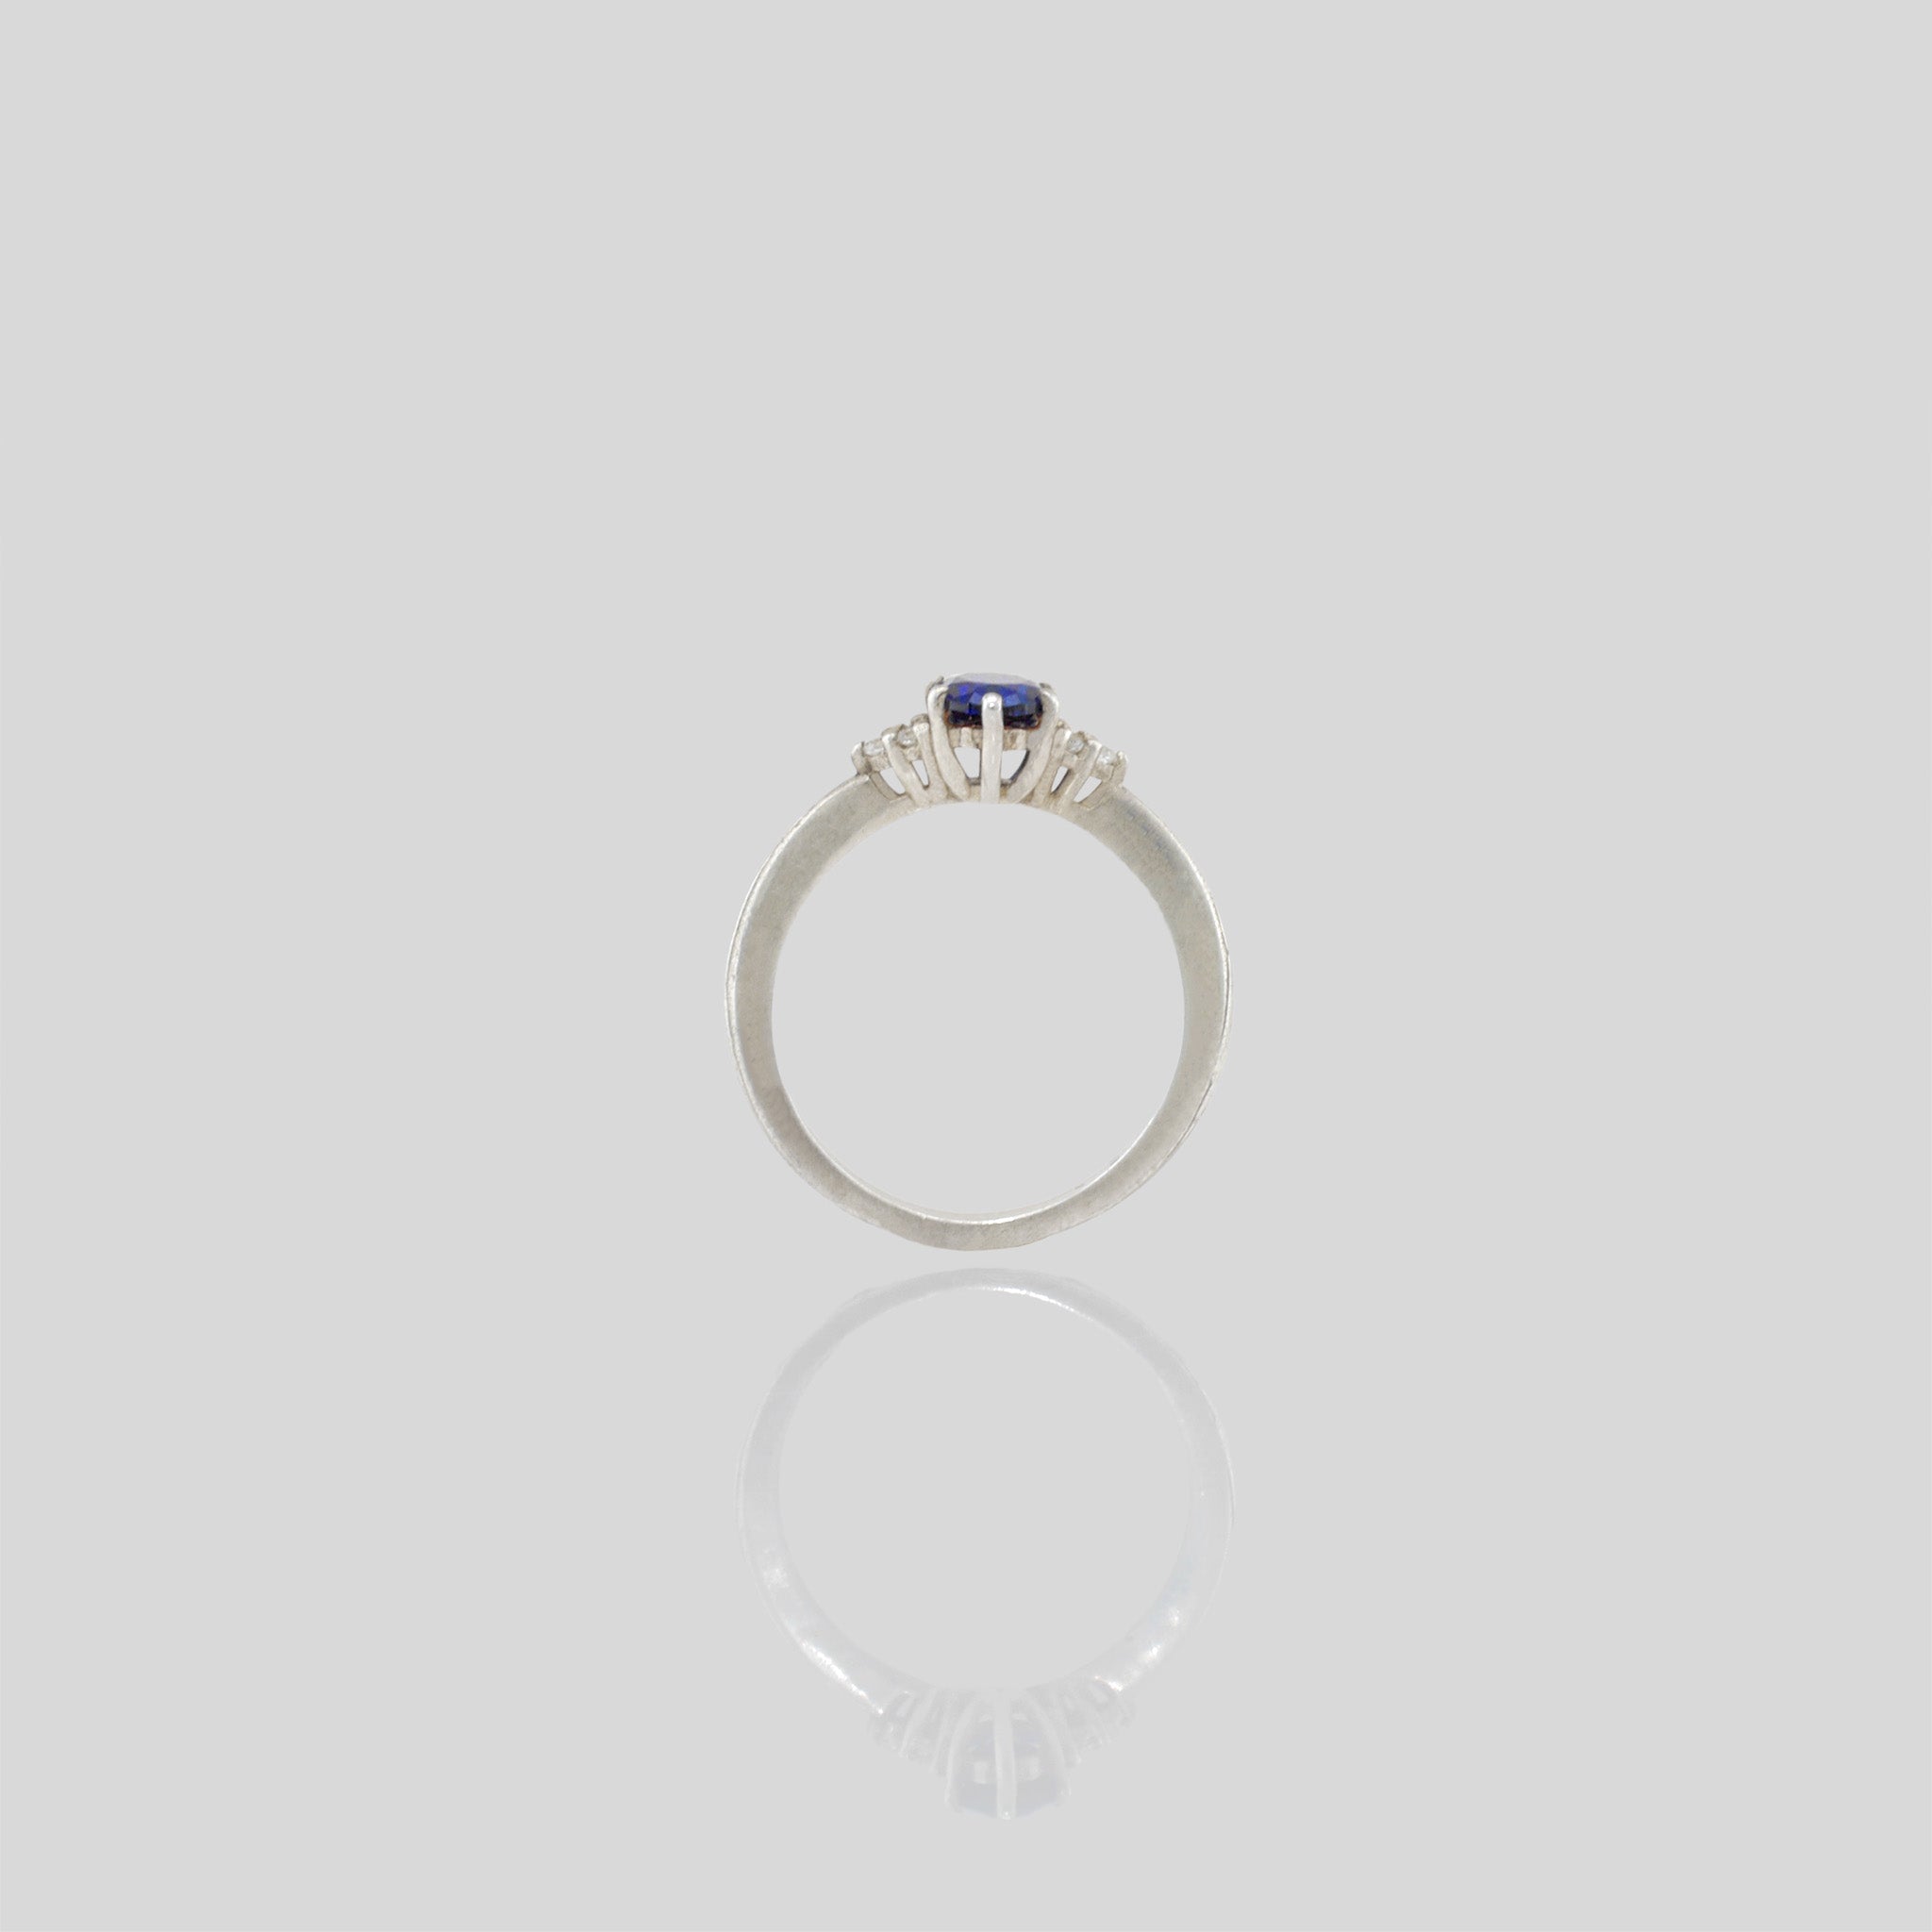 Side view of our White Gold engagement ring featuring an oval central Sapphire and three dainty Diamonds on each side, offering timeless elegance with added sparkle.